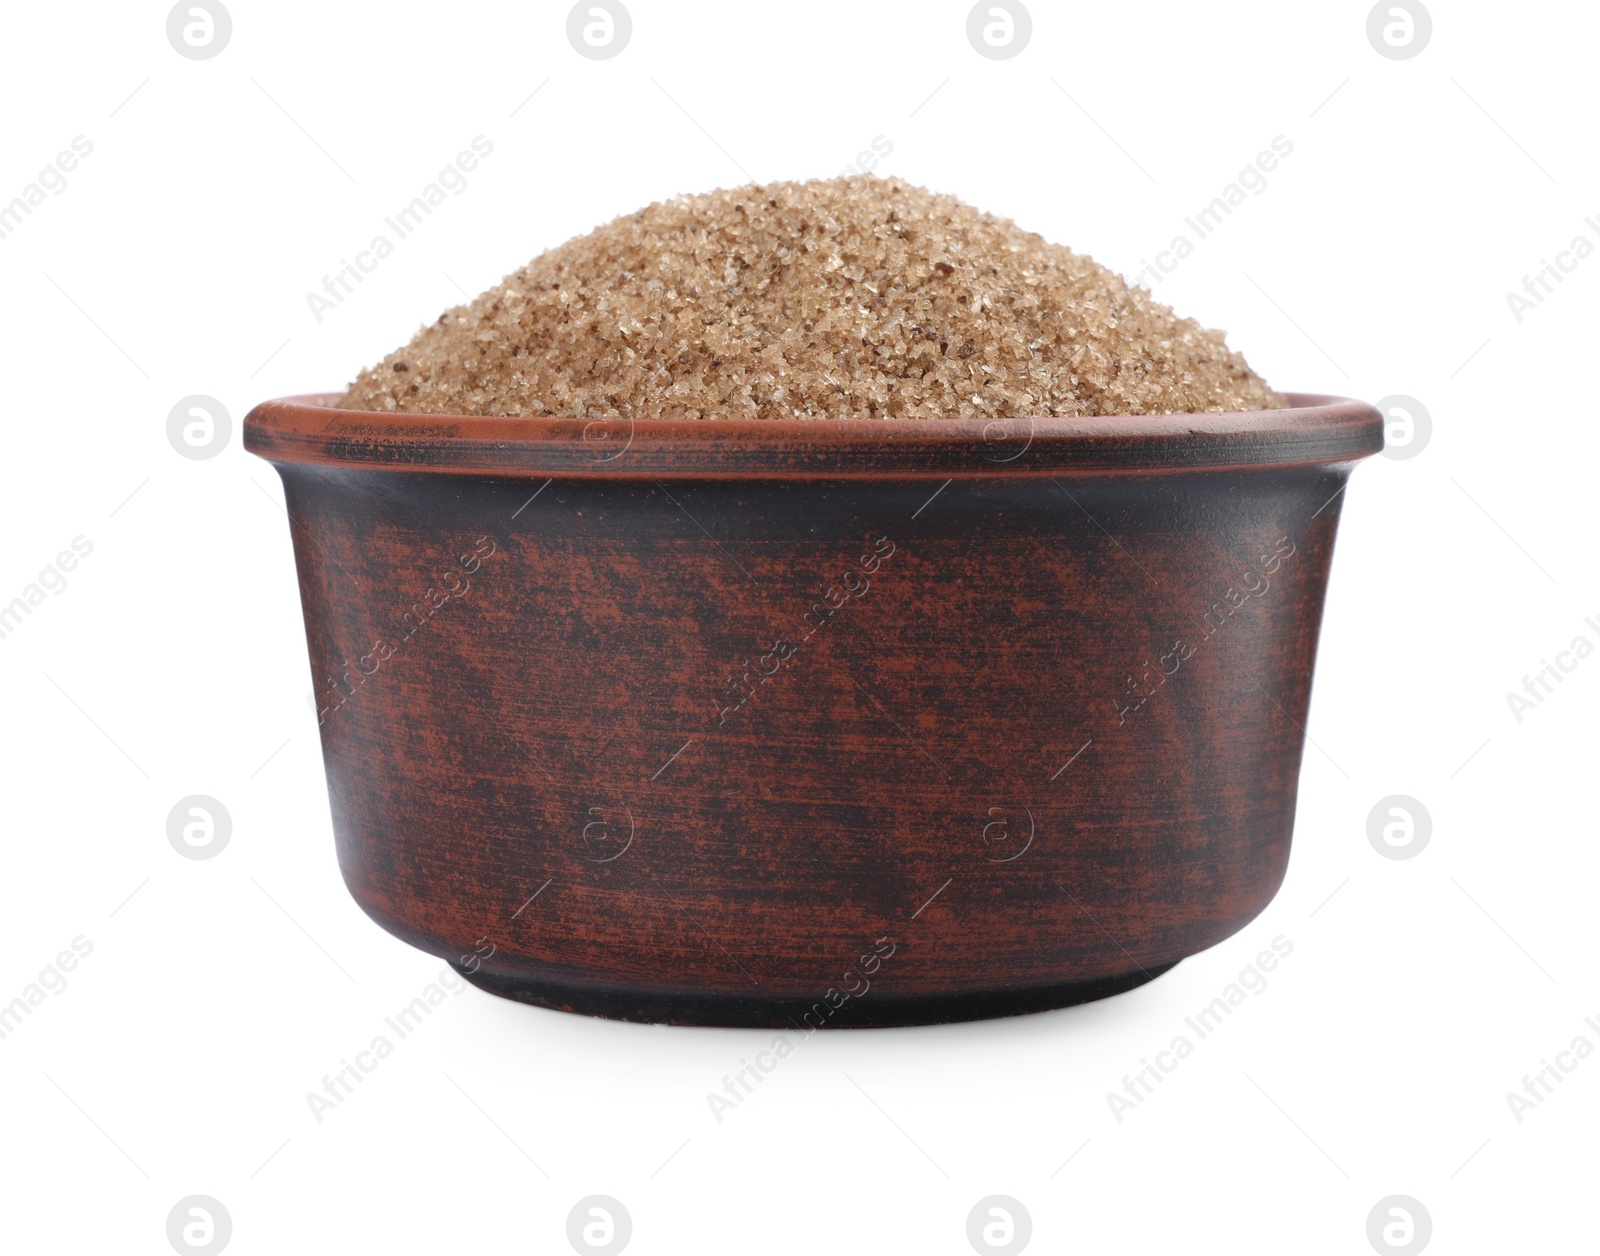 Photo of Brown salt in bowl isolated on white